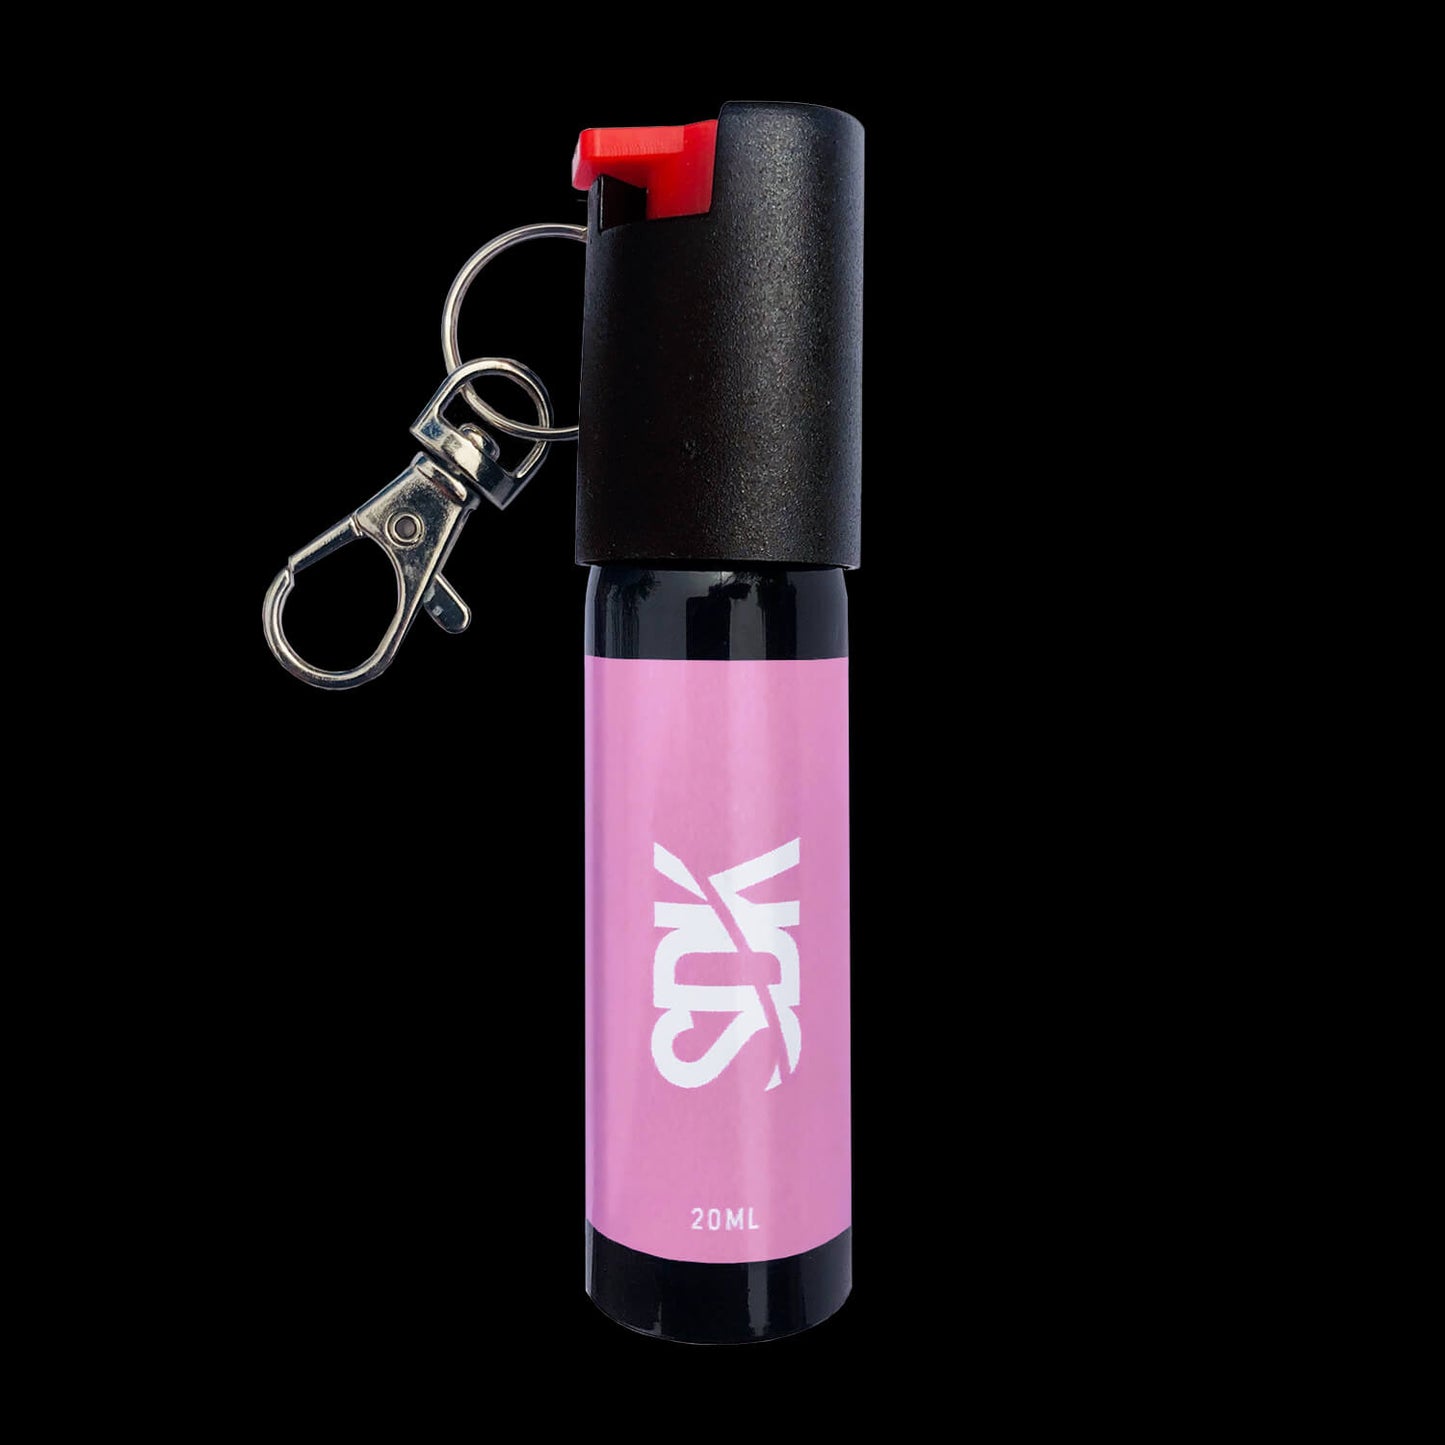 SDK Kit Pink Pepper Spray (20ml compact Pepper Spray with keychain attachment)